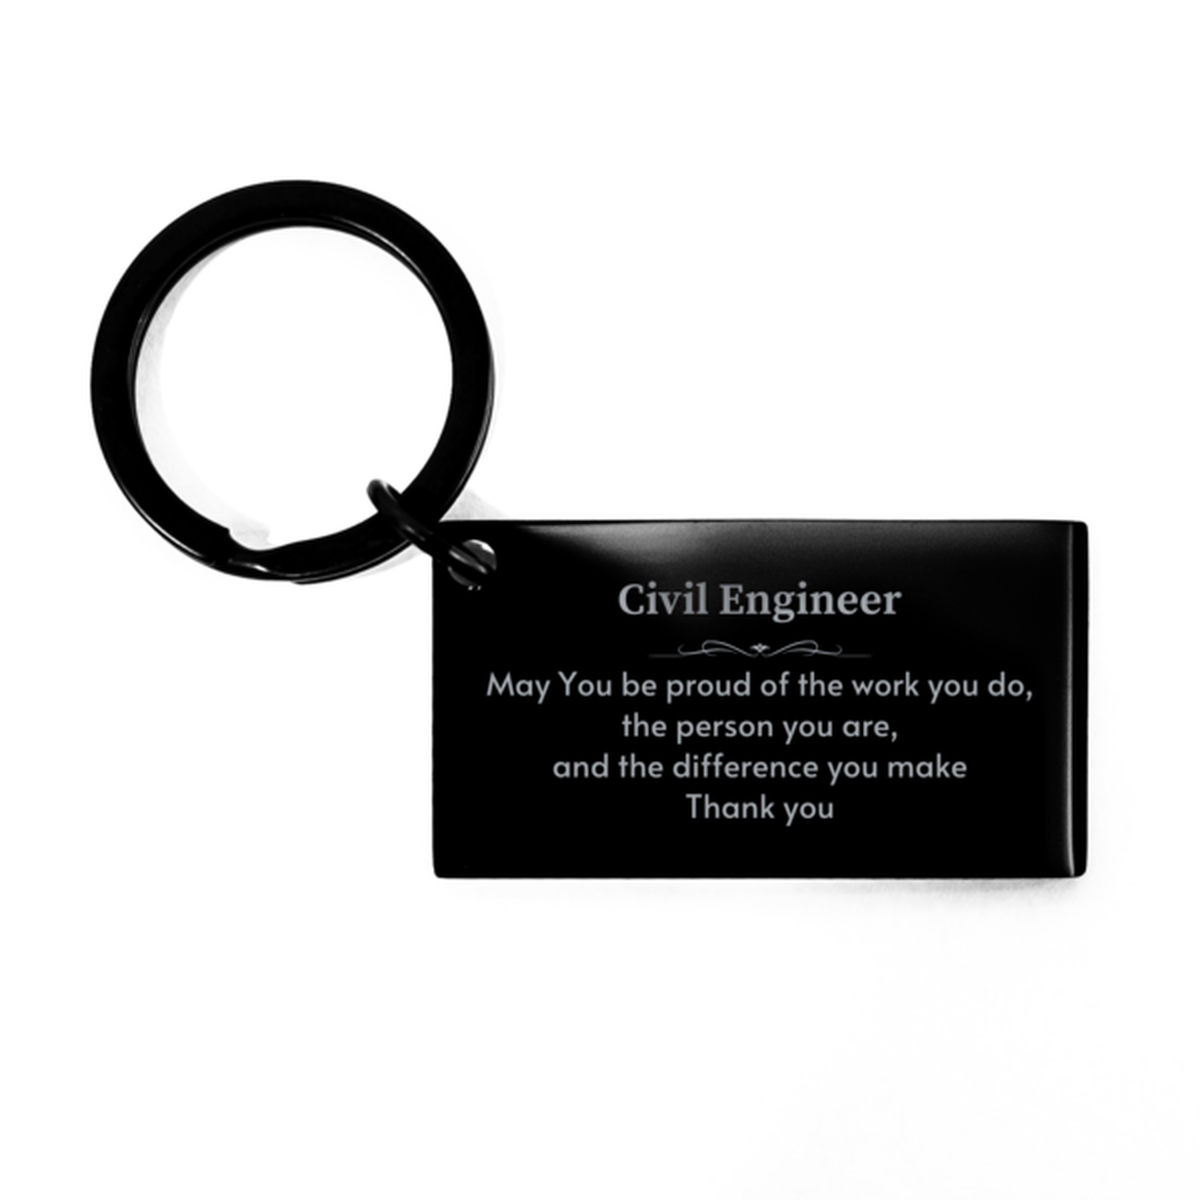 Heartwarming Keychain Retirement Coworkers Gifts for Civil Engineer, Doctor May You be proud of the work you do, the person you are Gifts for Boss Men Women Friends